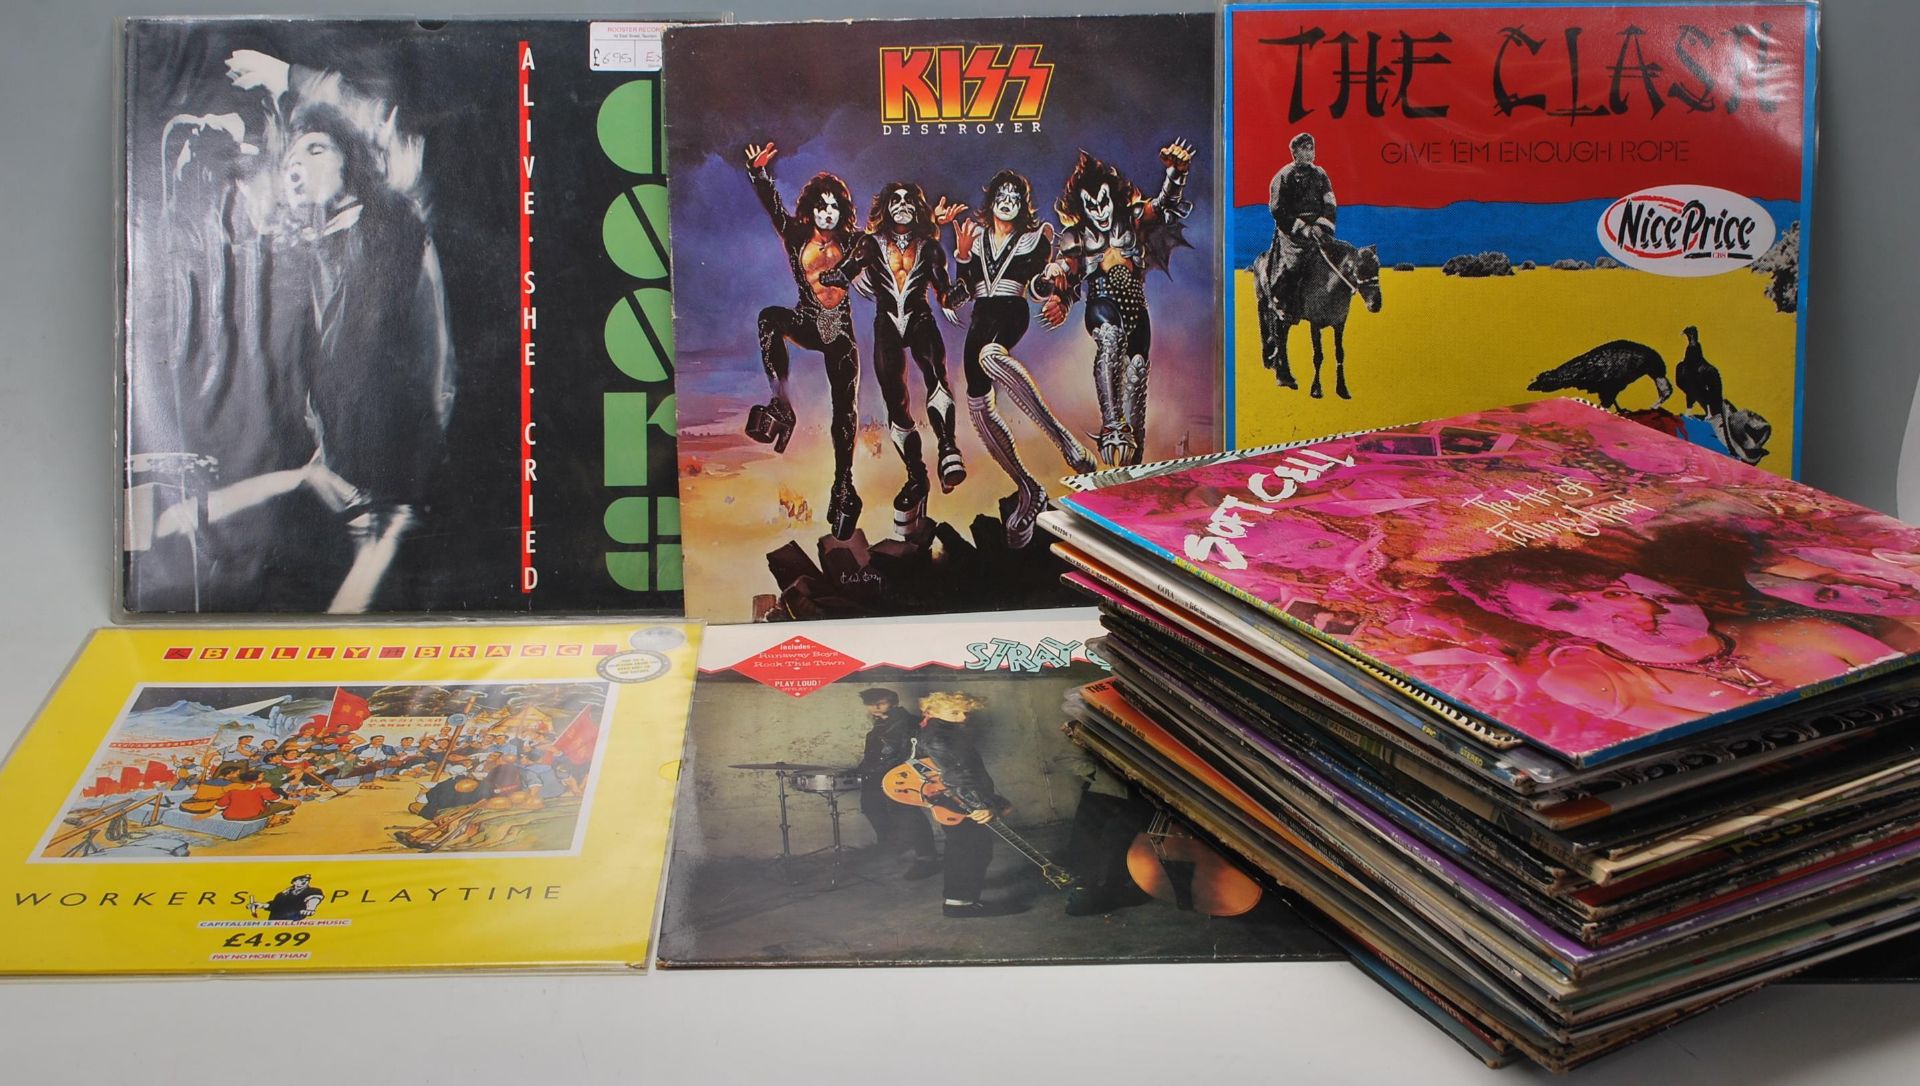 A collection of vintage records / 78's to include The Doors, Kiss, The Clash, Billy Bragg, Stray